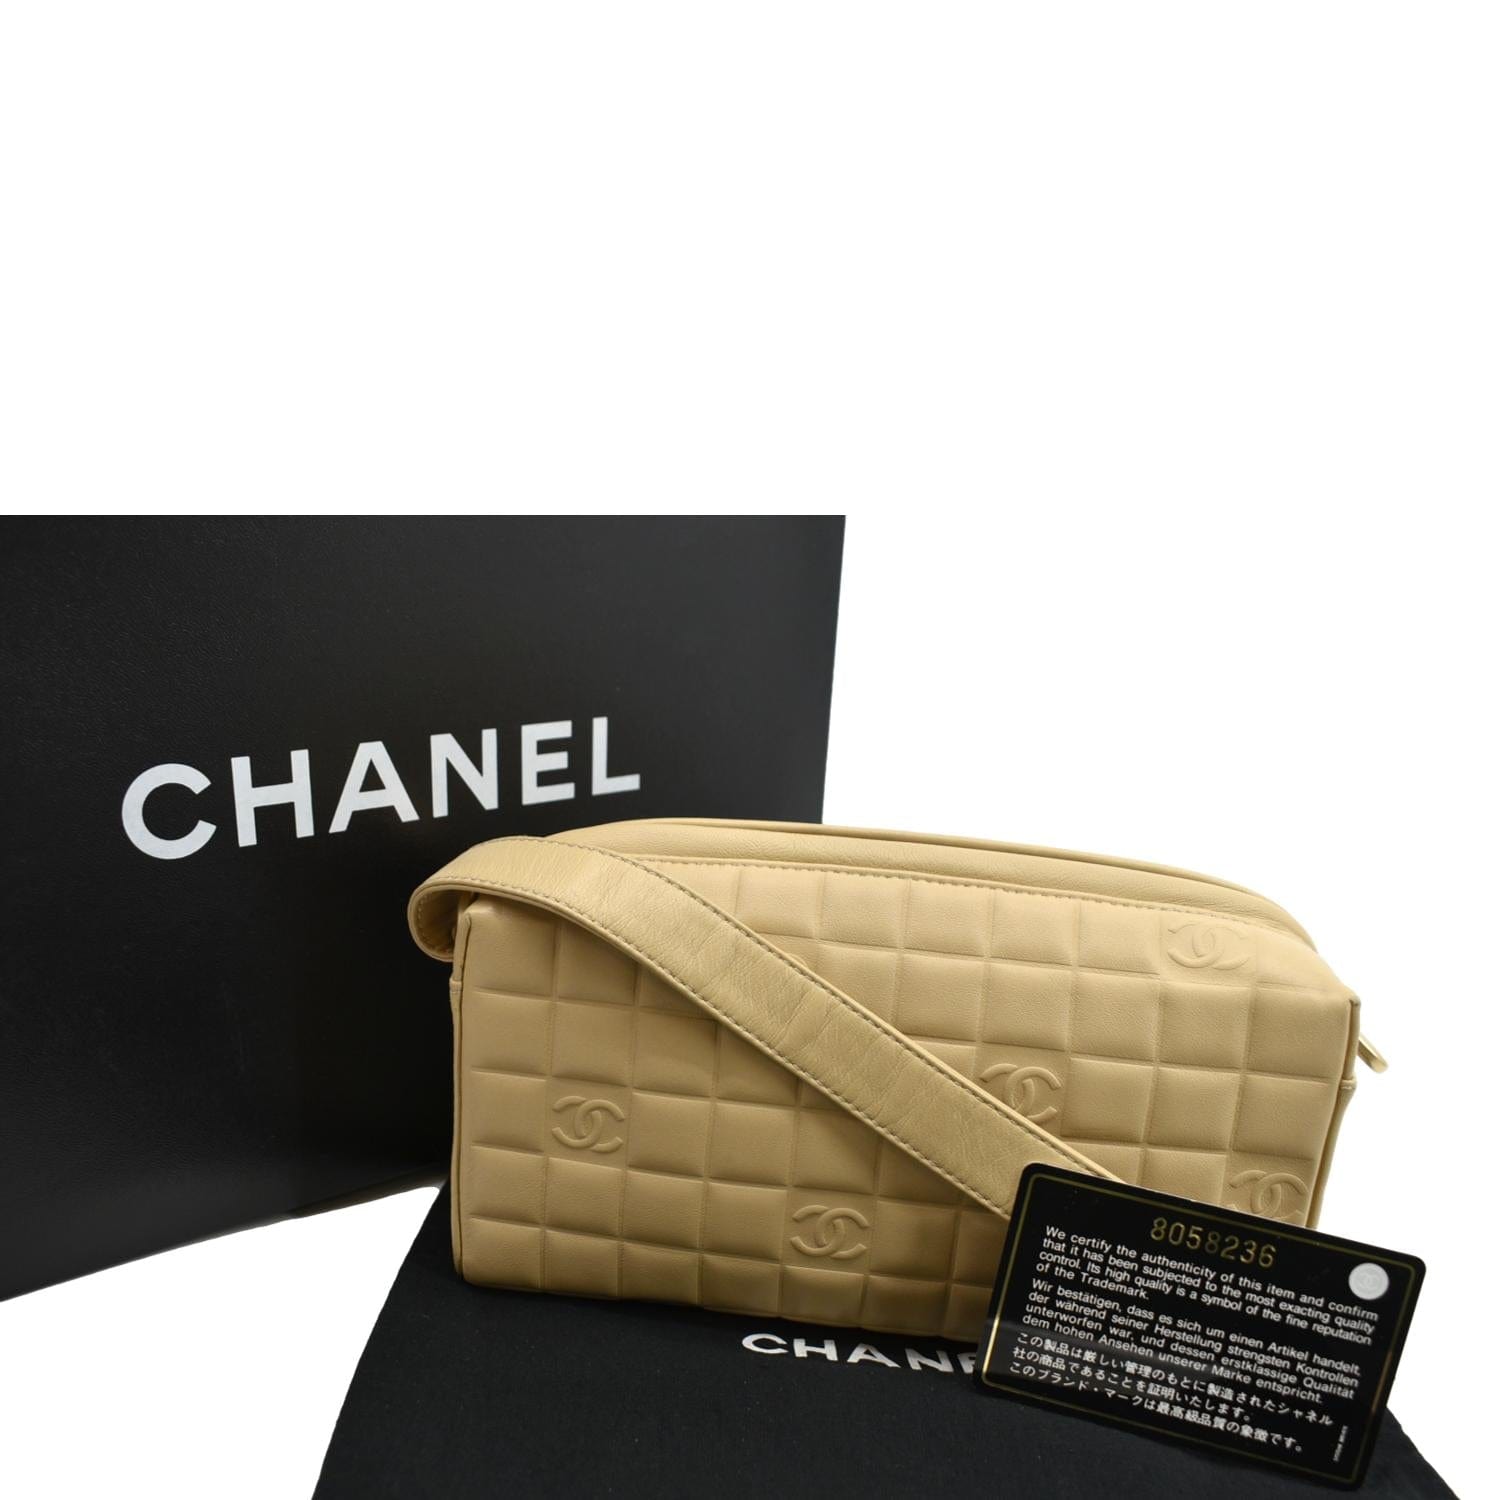 Pre-Owned Chanel Clutch Bag Gold Chocolate Bar Leather Lambskin